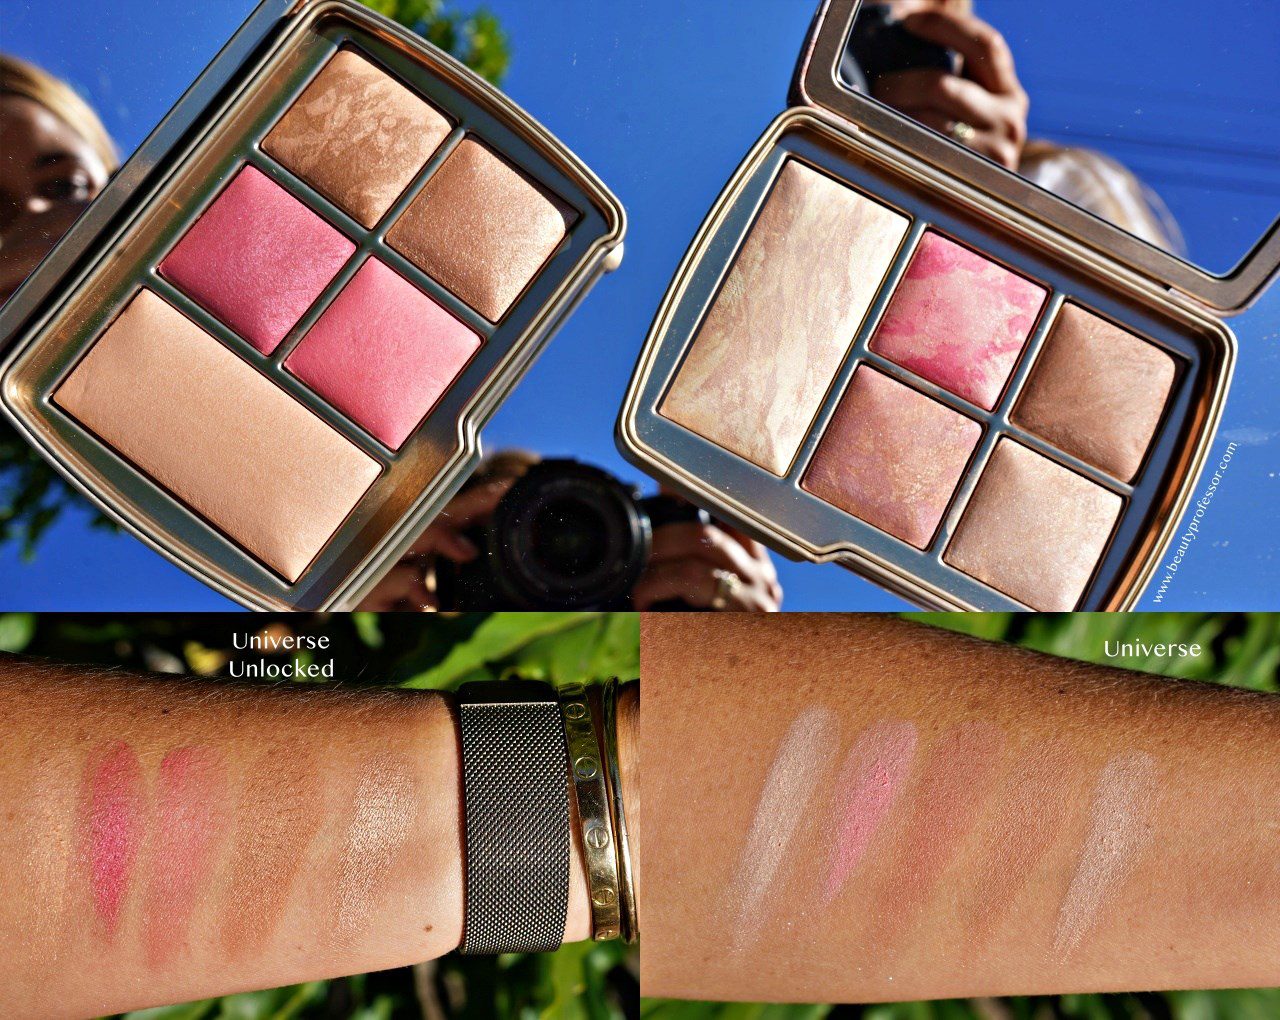 Hourglass Ambient Lighting Edit eye shadows from the Beautylish gift card event